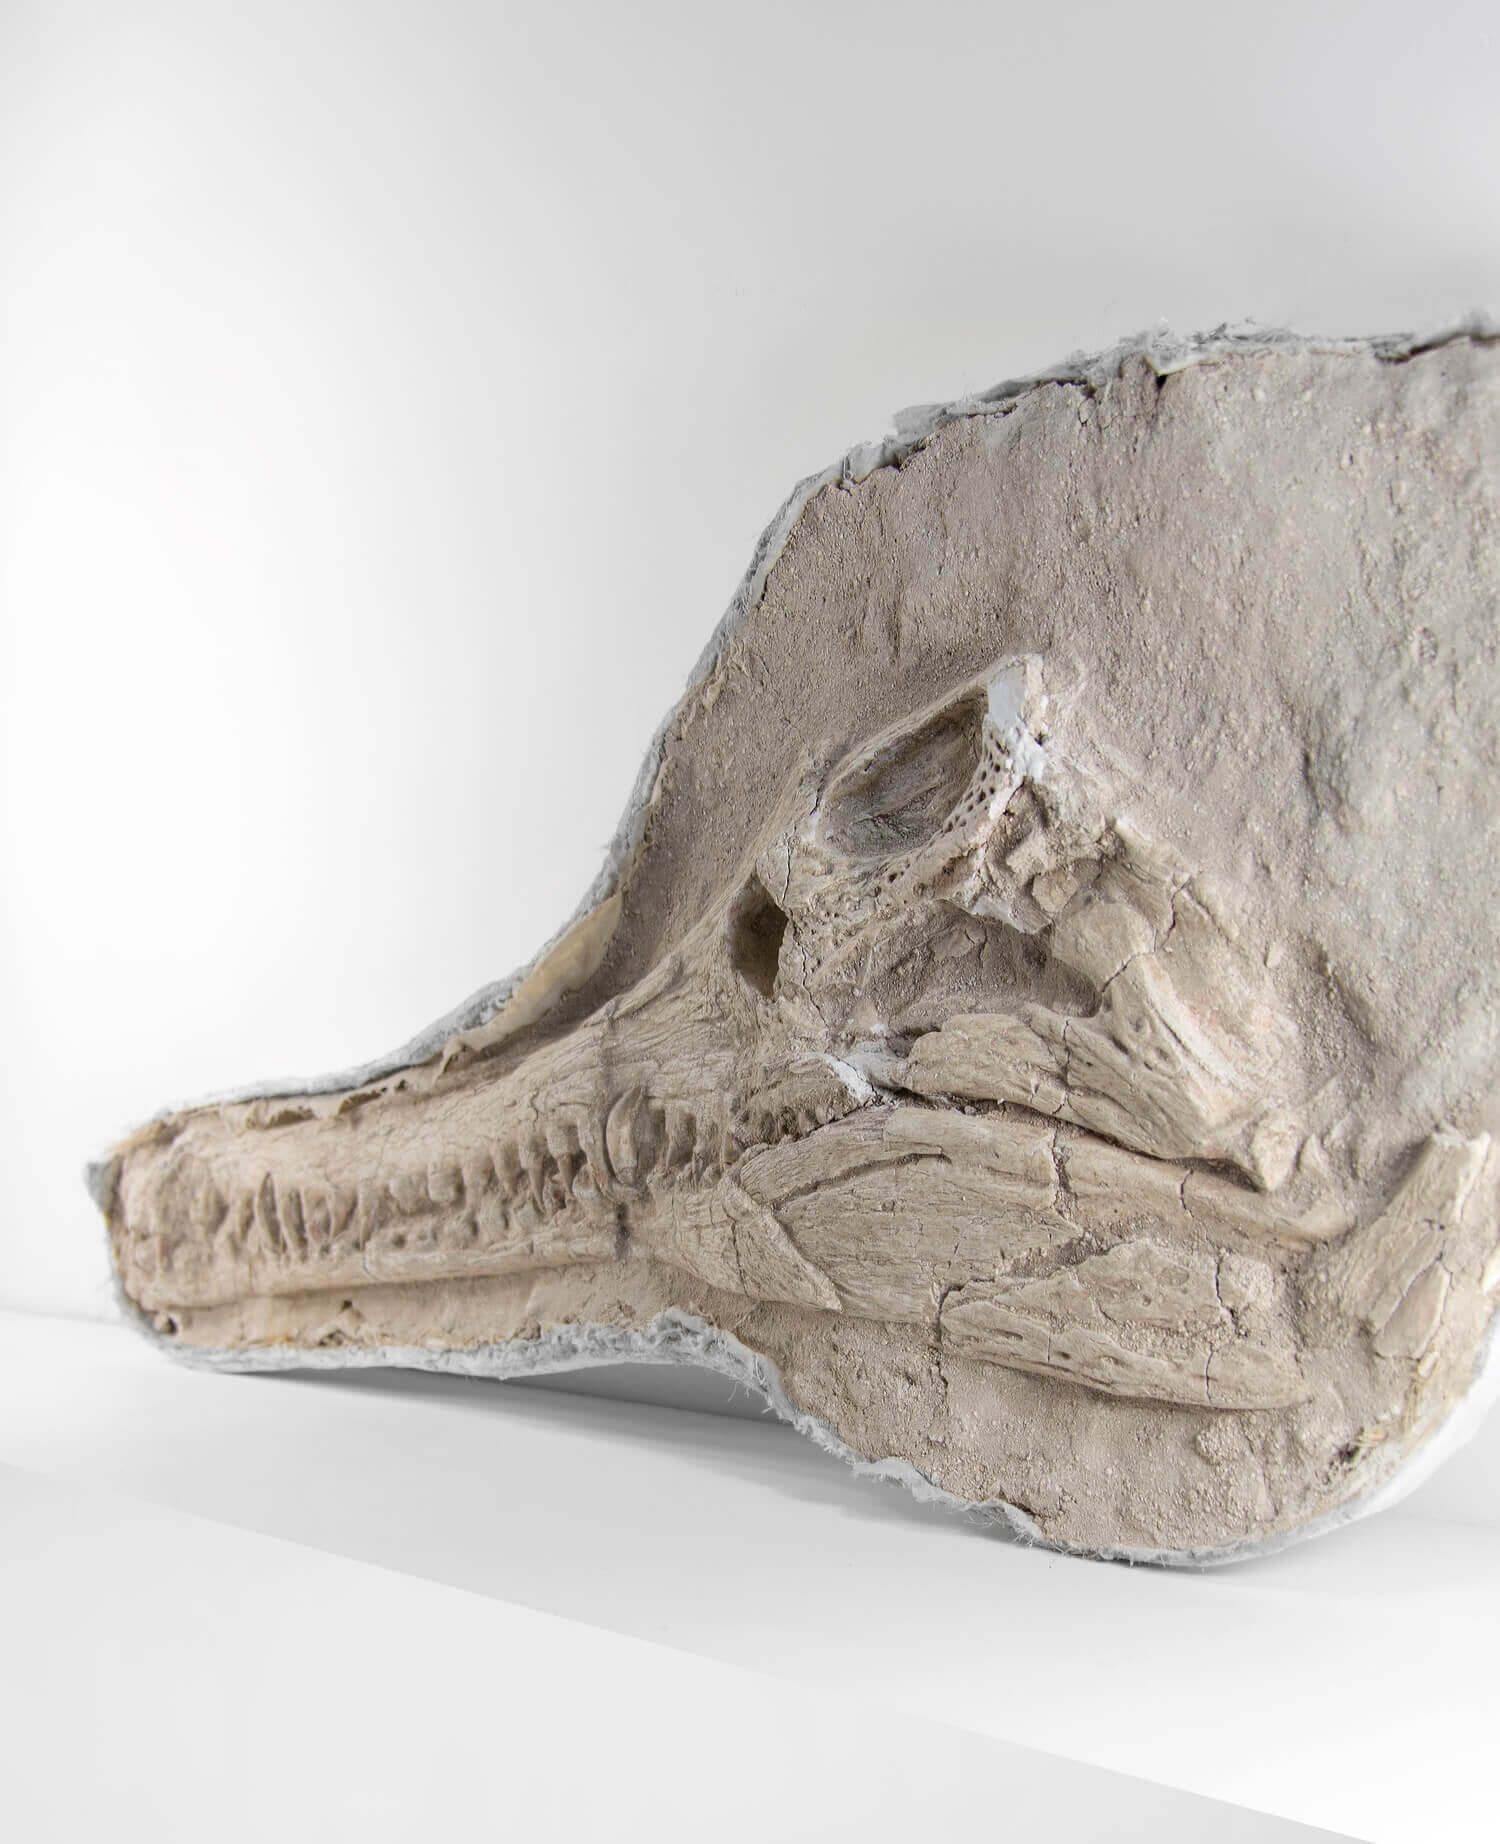 Highly important museum-quality Dyrosaurus Crocodile fossil Skull for sale measuring 1.2 meters